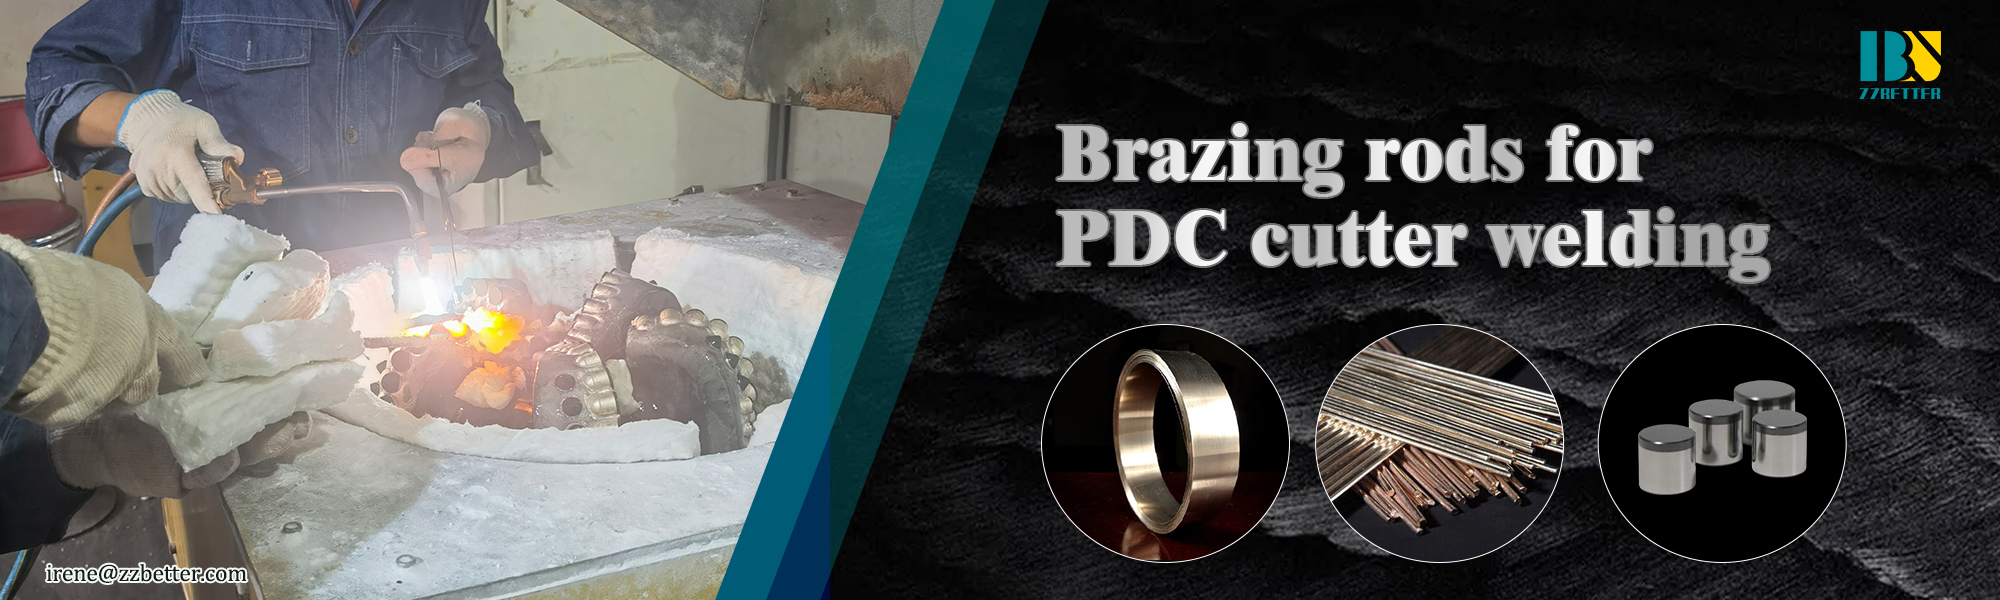 Brazing rods used for PDC cutter welding